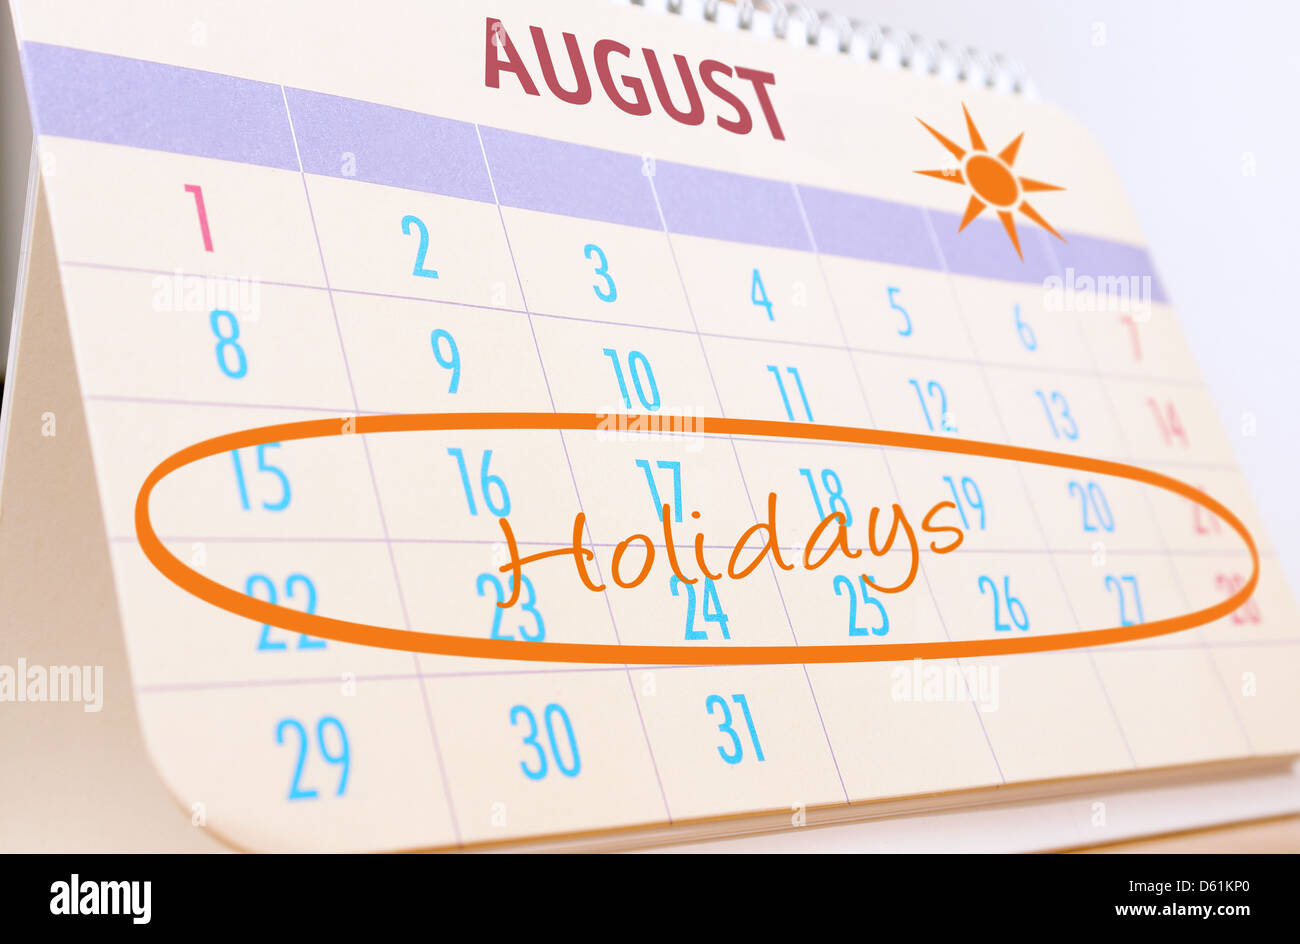 Desktop calendar showing August month with highlighted planned summer holidays Stock Photo